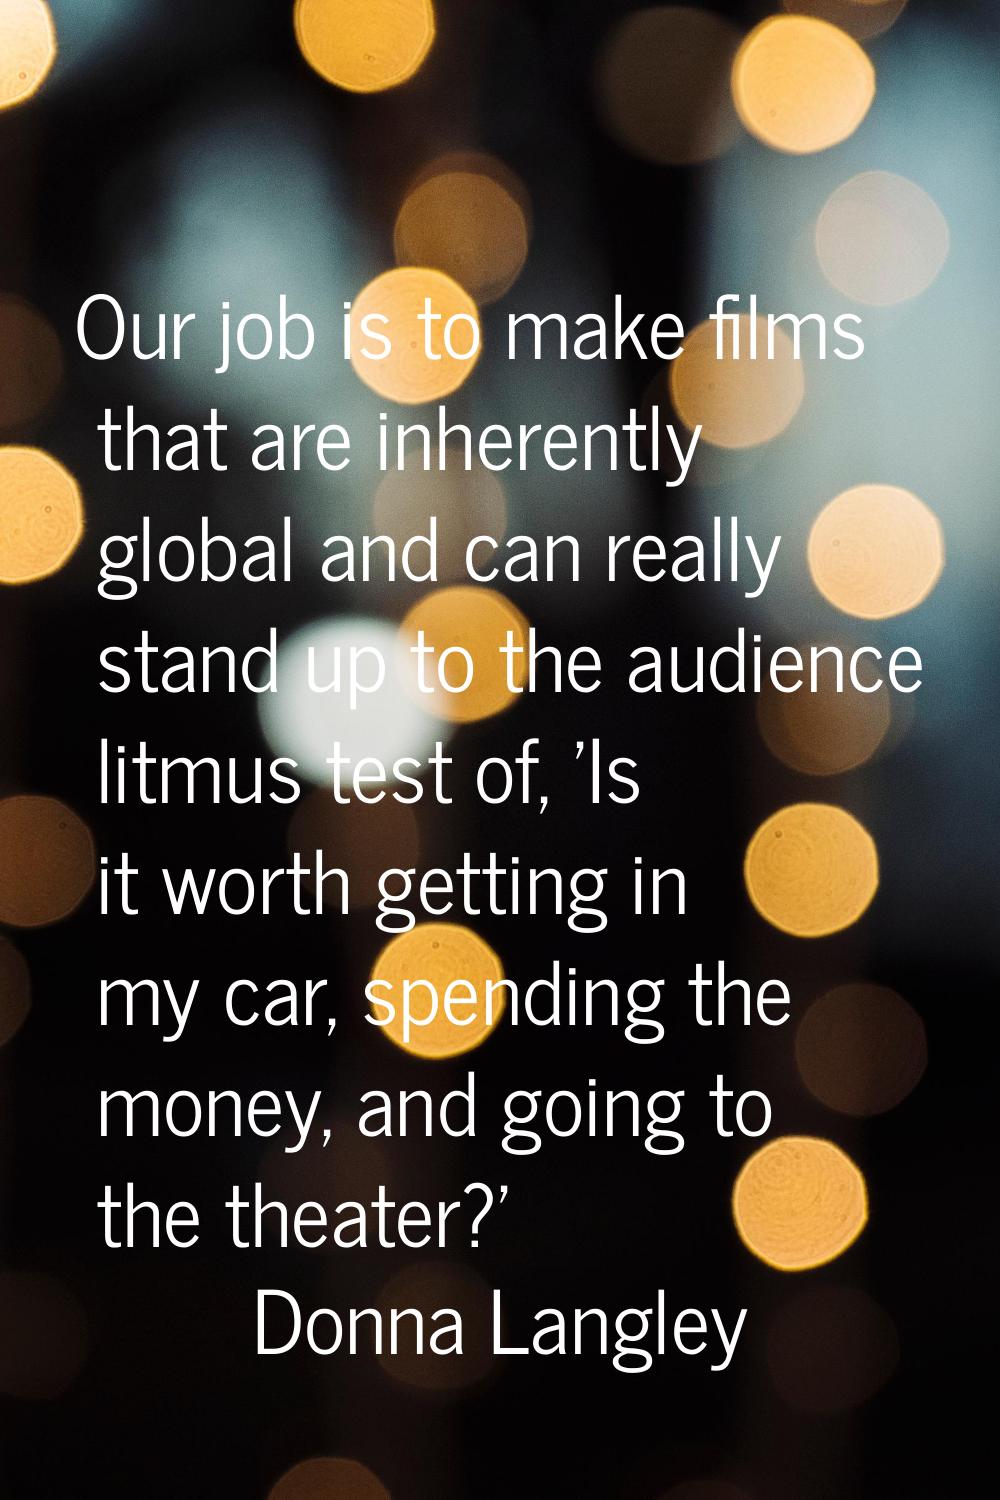 Our job is to make films that are inherently global and can really stand up to the audience litmus 